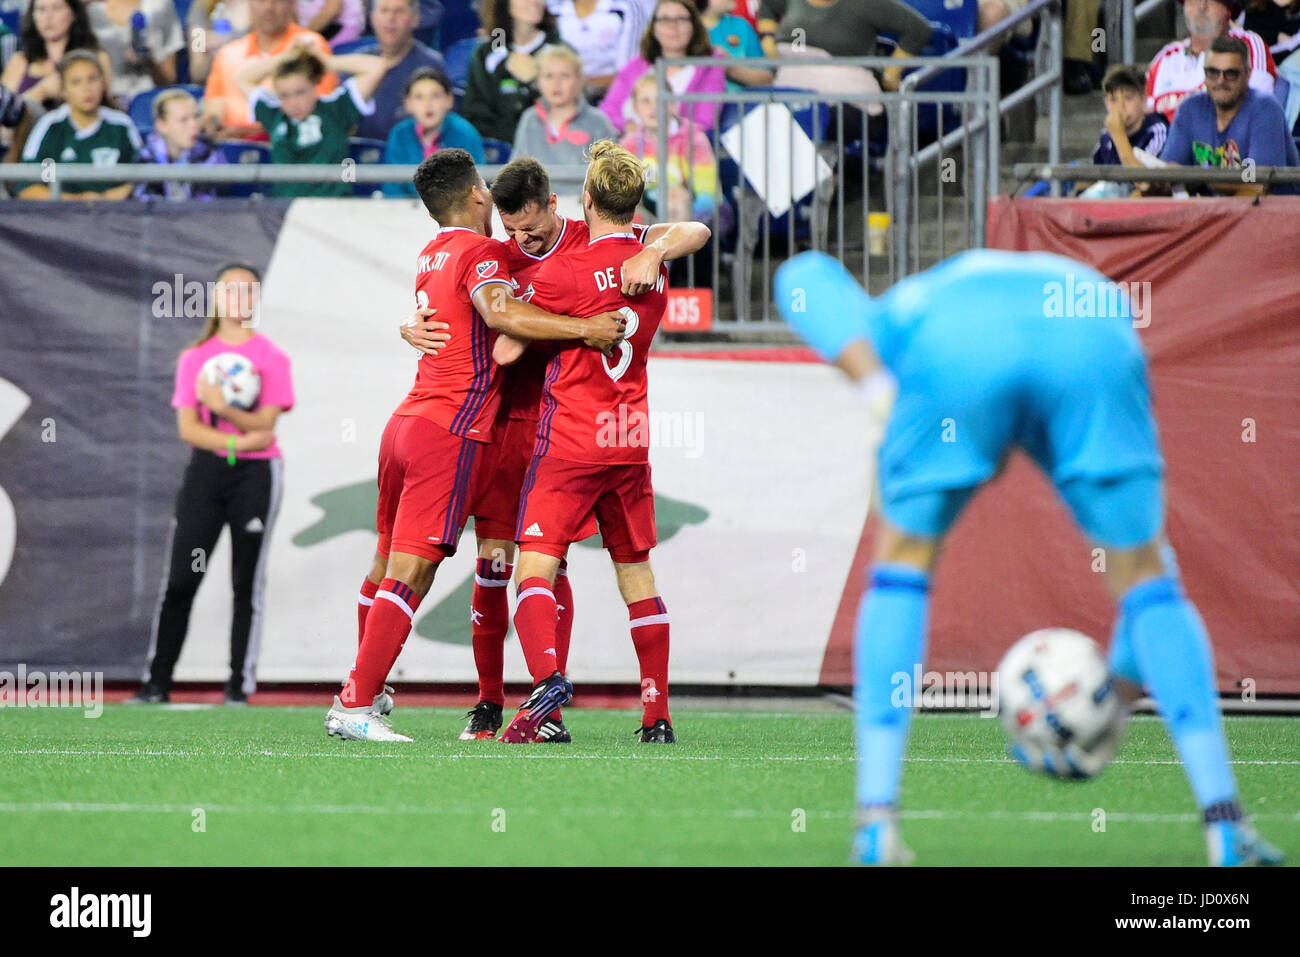 Foxborough Massachusetts, USA. 17th June, 2017. Chicago Fire forward Luis Solignac (9) (center) celebrates his goal with defender Brandon Vincent (3)(left) and midfielder Michael de Leeuw (8)(right) during the MLS game between Chicago Fire and the New England Revolution held at Gillette Stadium in Foxborough Massachusetts. Chicago defeats New England 2-1. Eric Canha/CSM/Alamy Live News Stock Photo